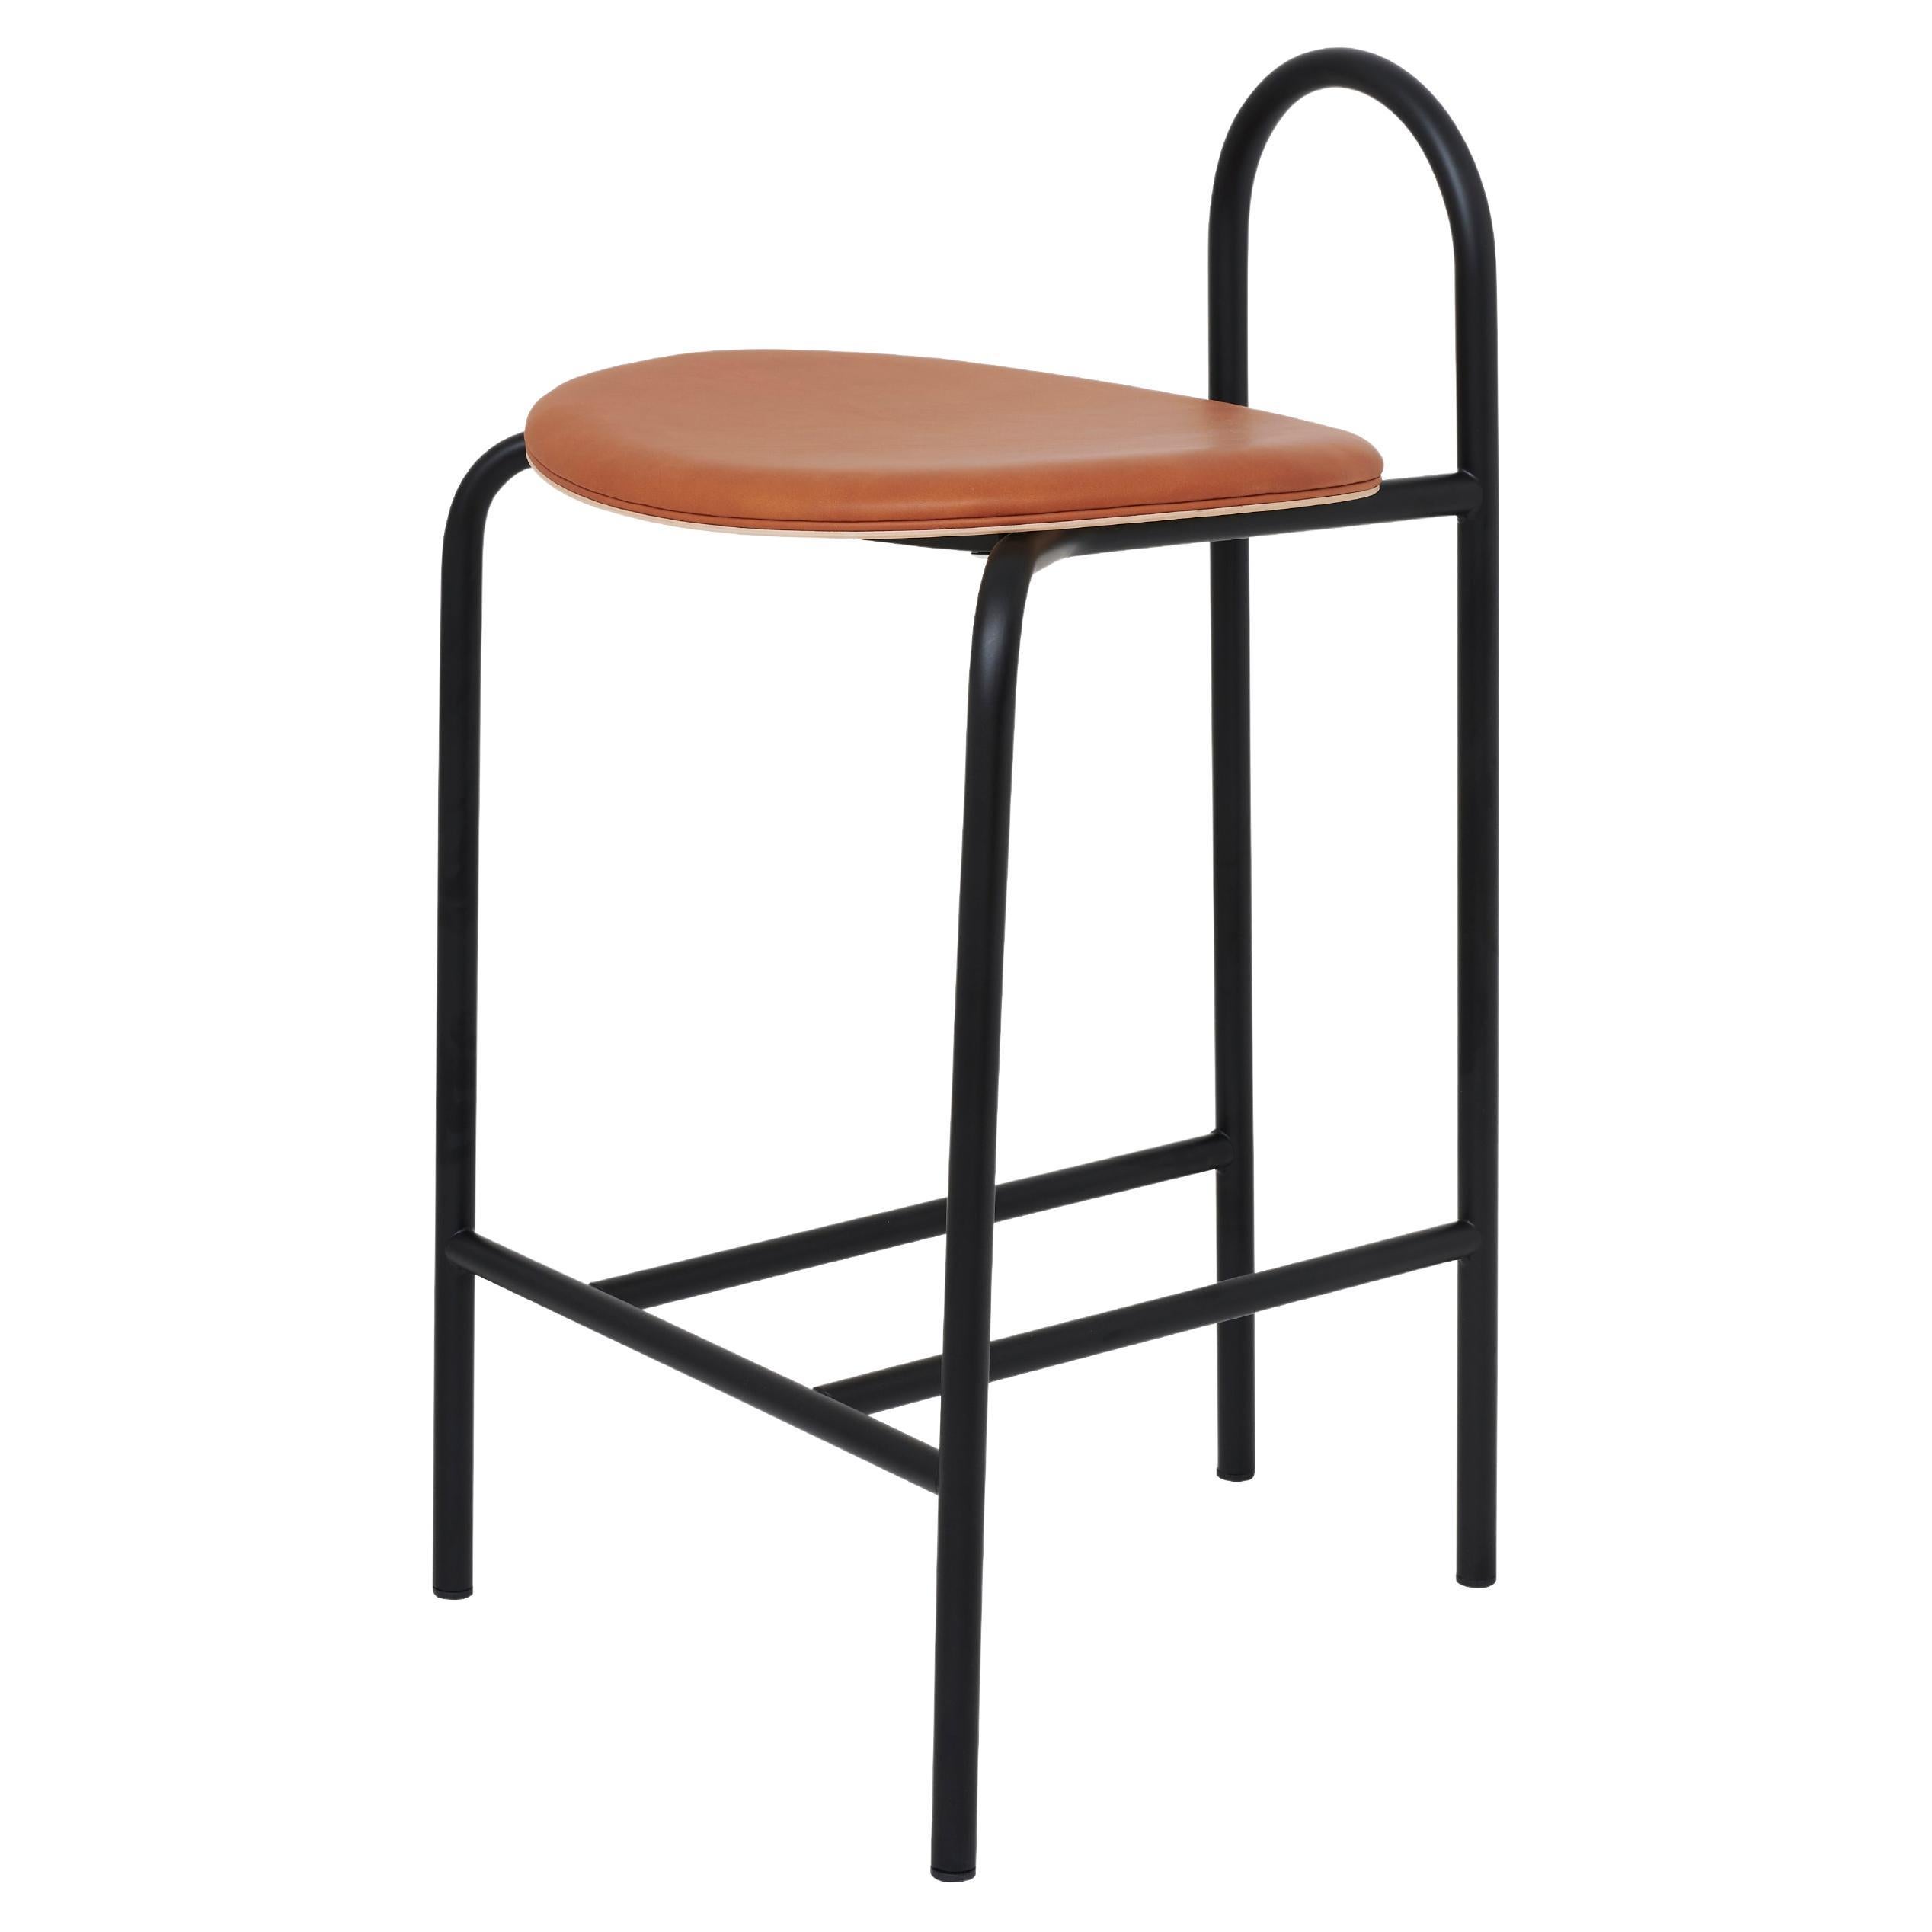 SP01 Michelle Low Bar Stool in Edinburgh Cognac Leather, Made in Italy For Sale